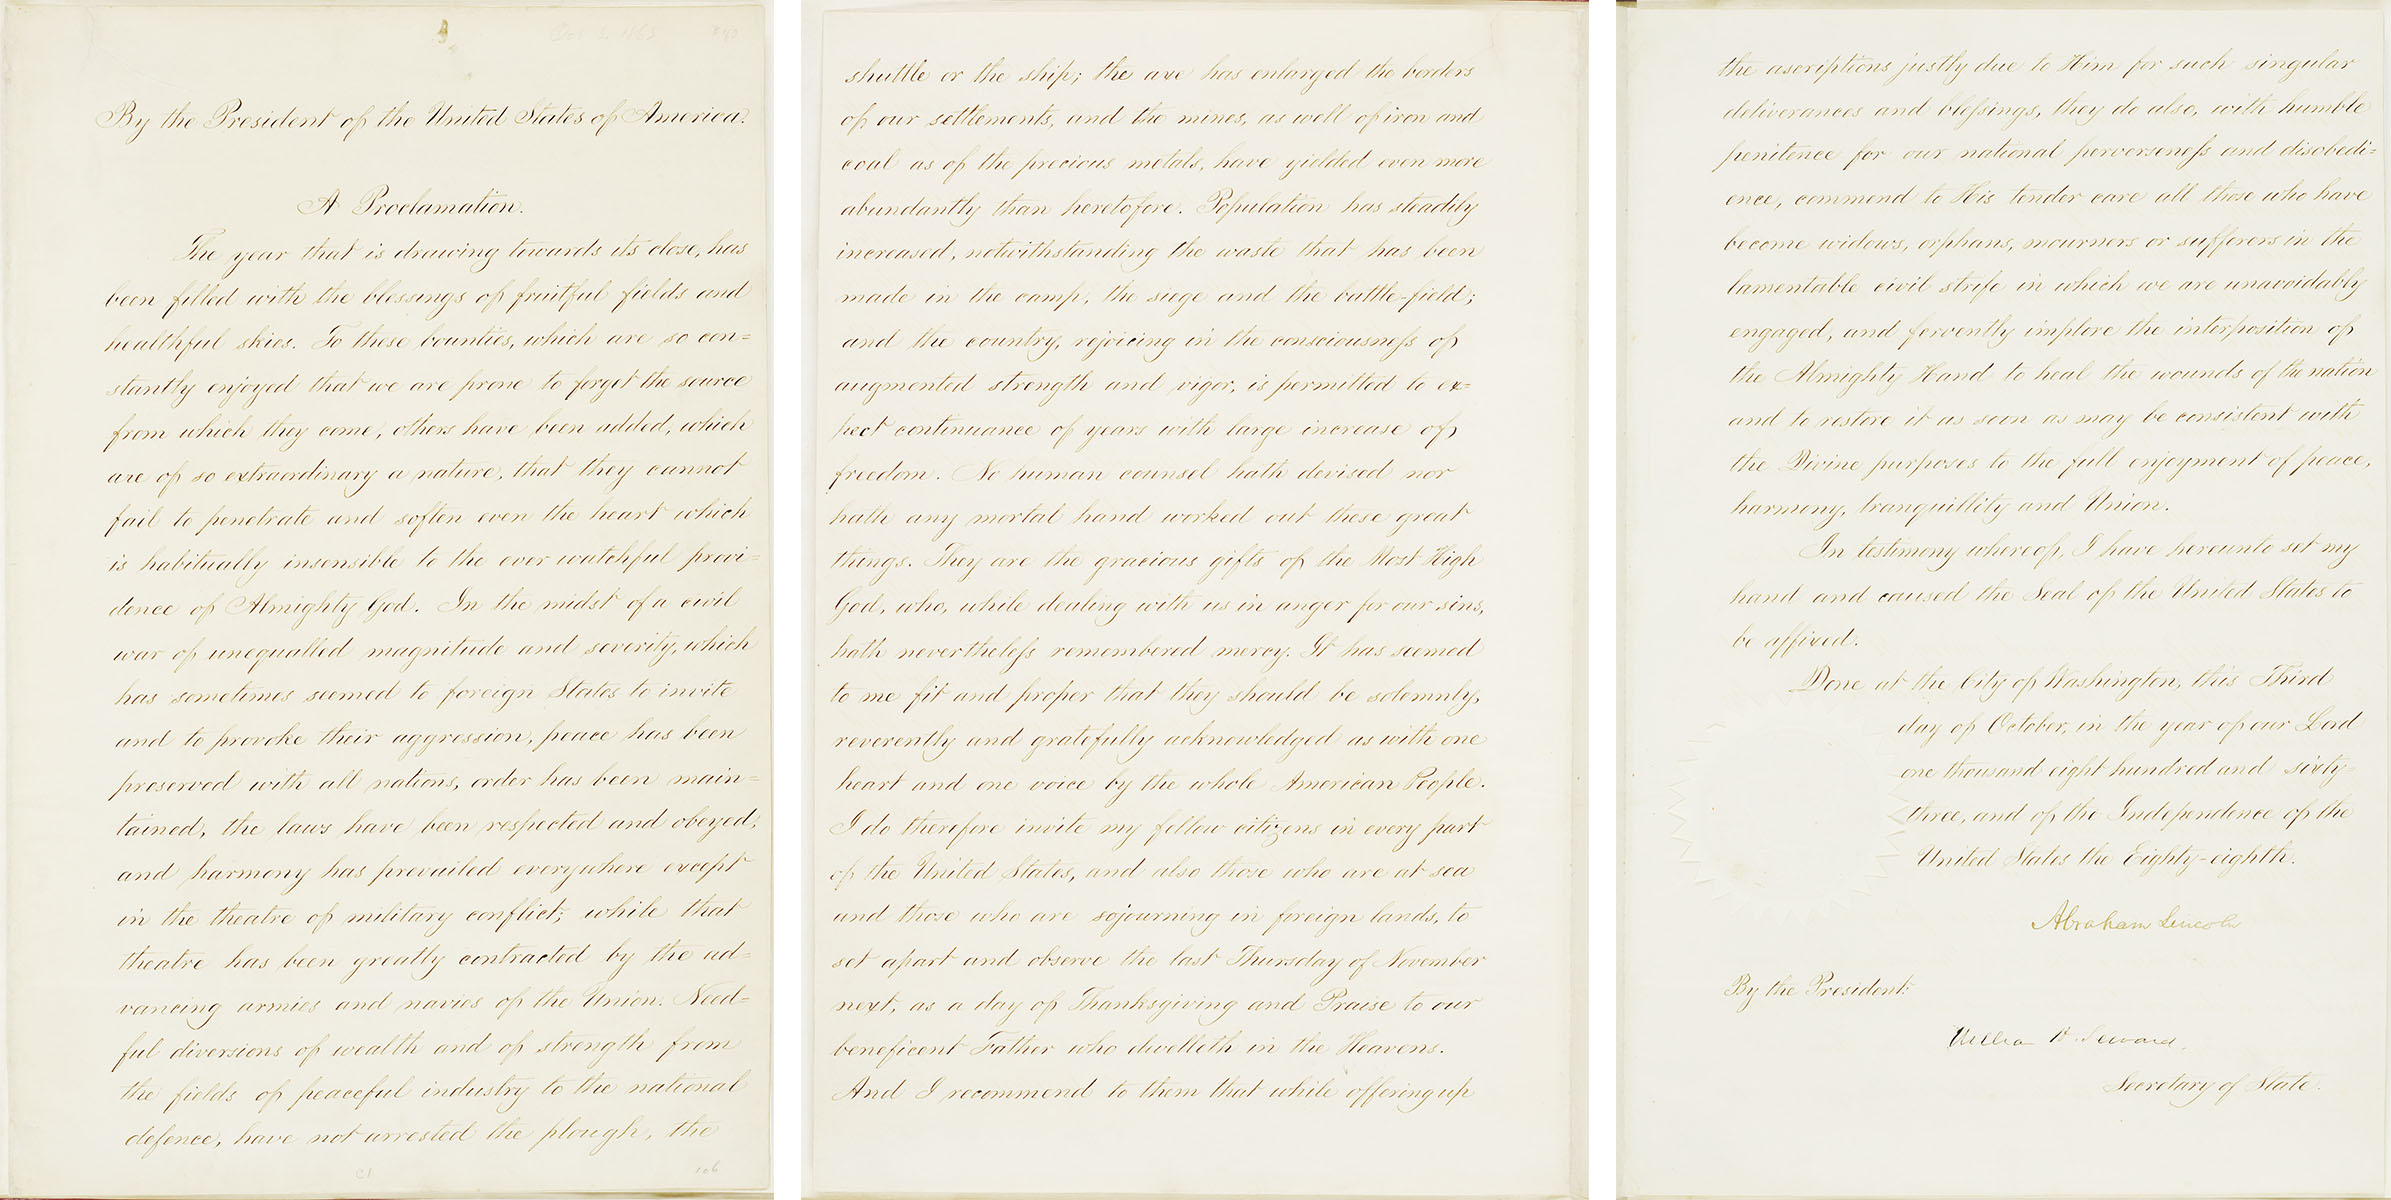 President Lincoln's Thanksgiving Day Proclamation